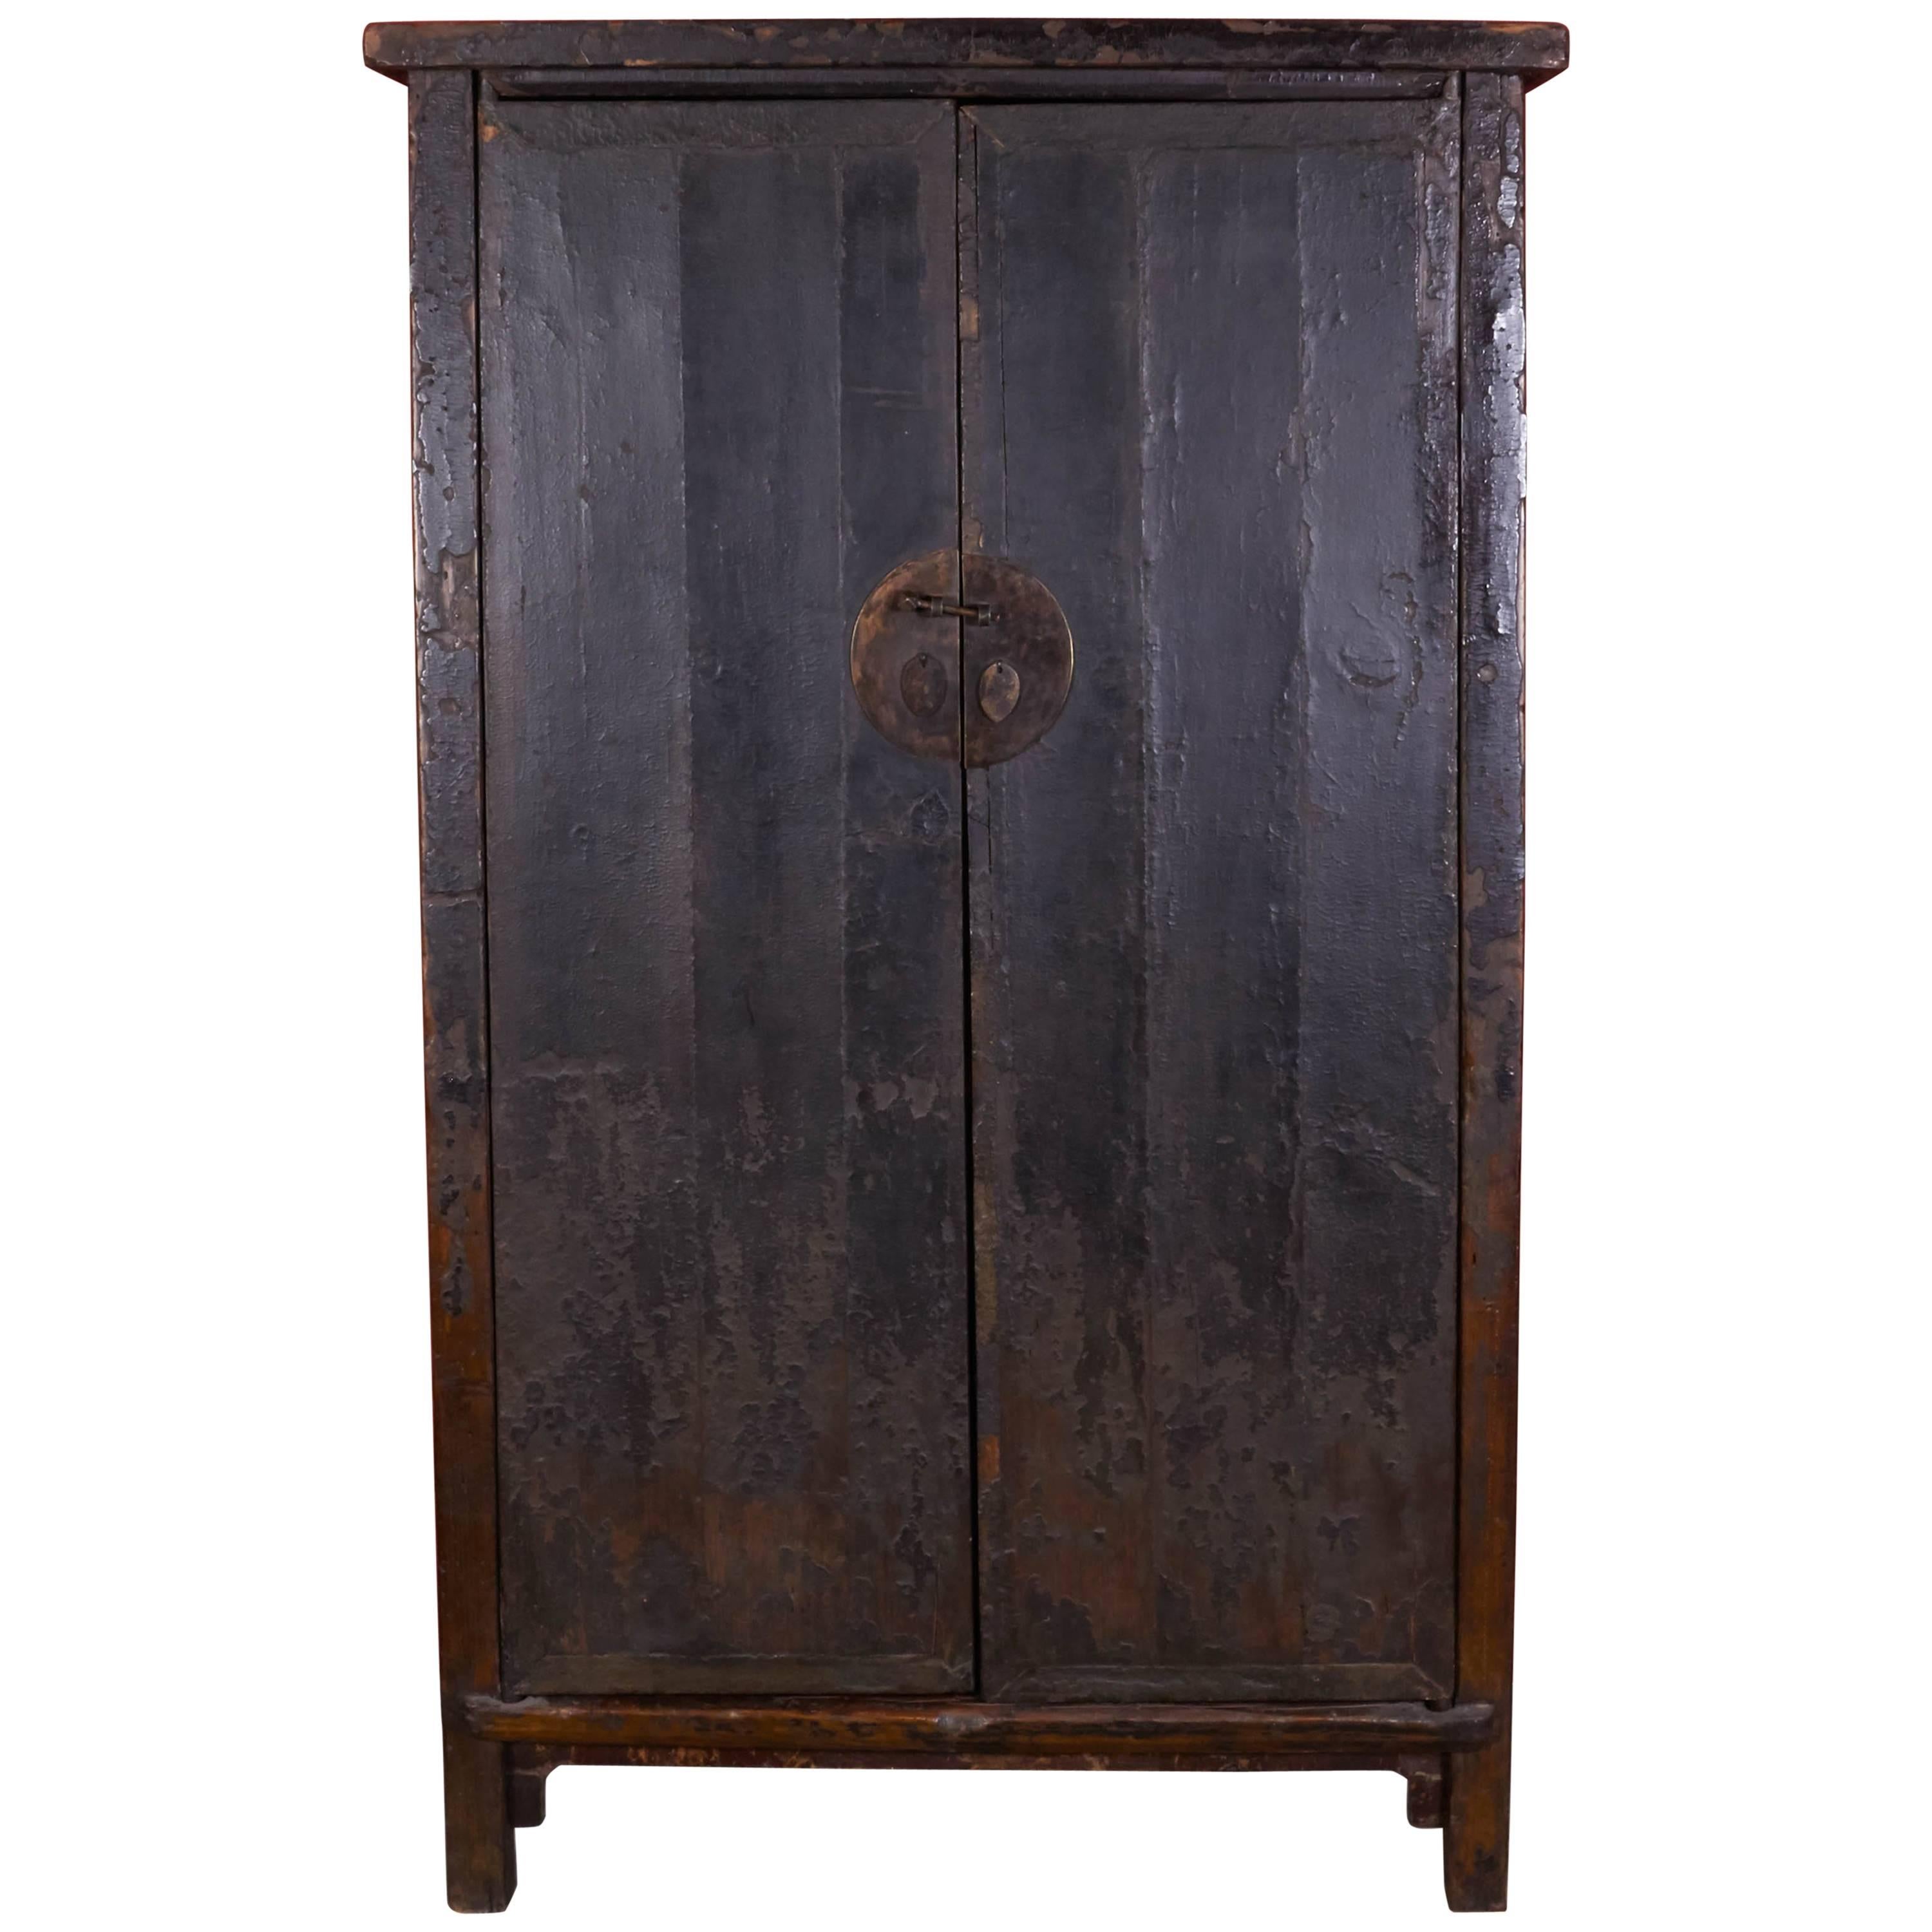 Fabulous Early 19th Century Cabinet with Original Thick Lacquer